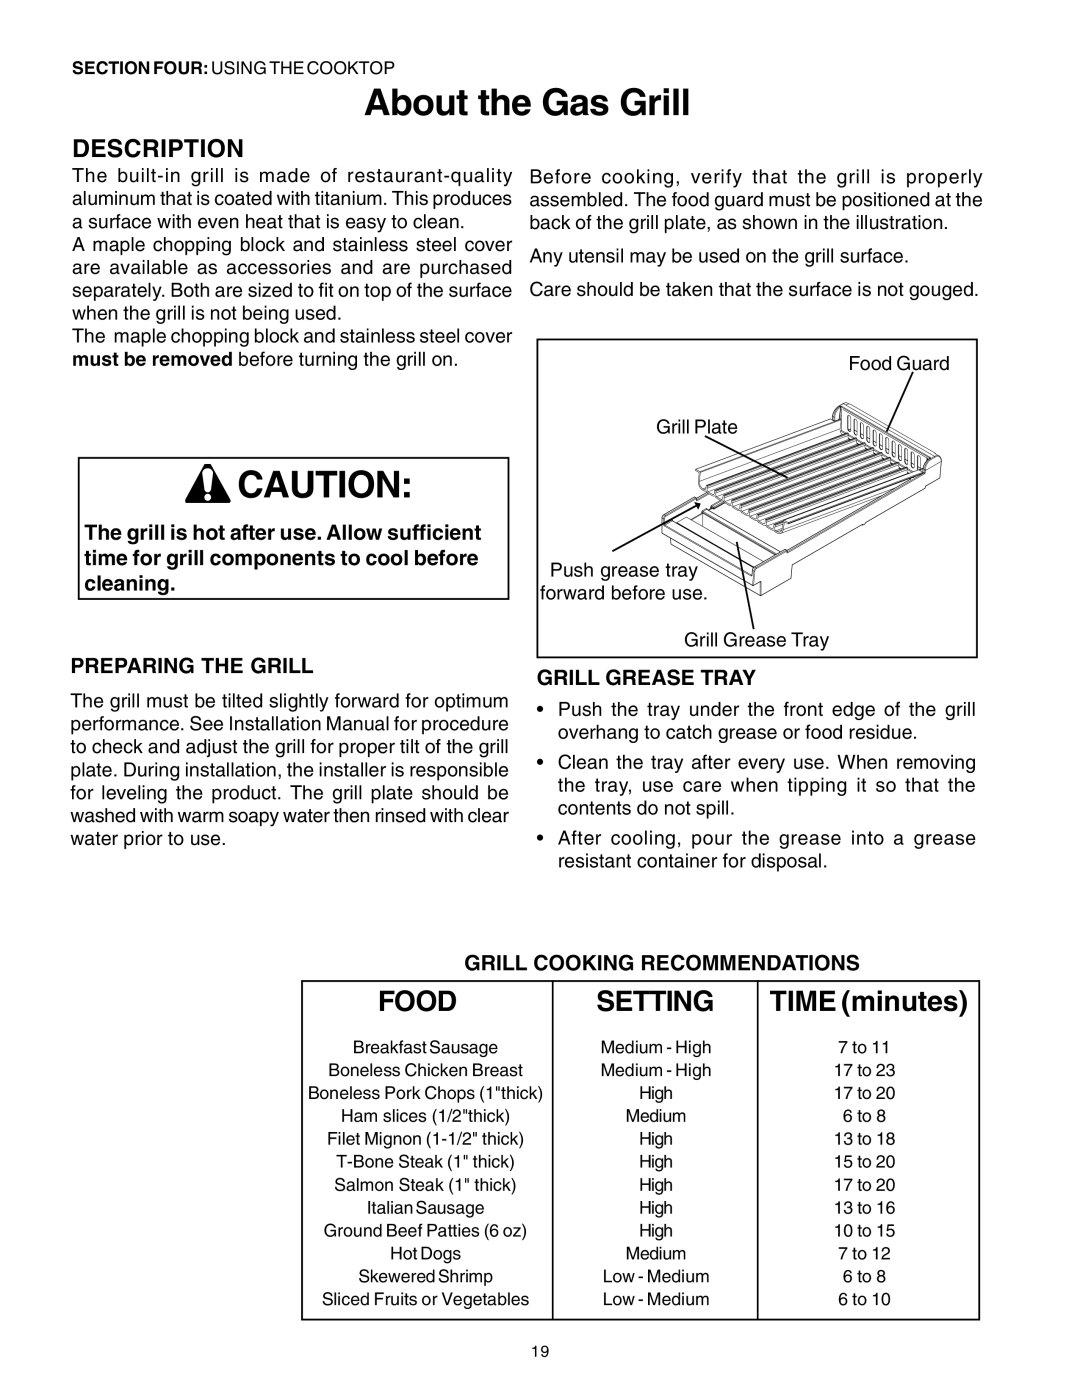 Thermador PG30 About the Gas Grill, Food, Setting, TIME minutes, Description, Preparing The Grill, Grill Grease Tray 